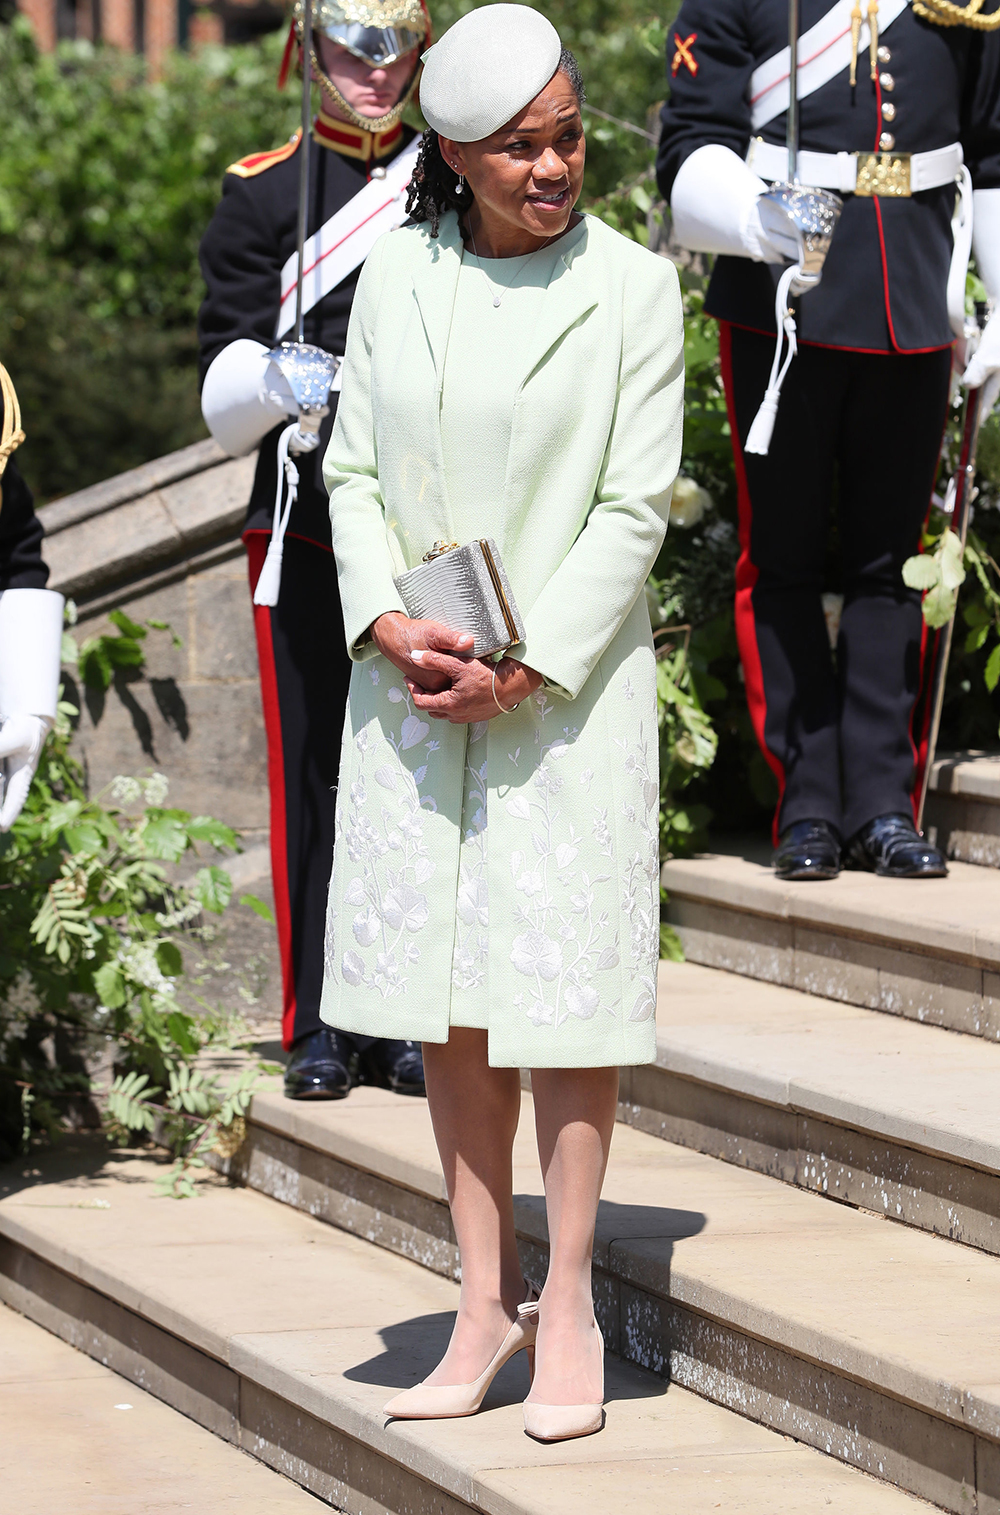 over 50 fashion and clothing inspiration: Doria Ragland at Meghan Markle's wedding wearing a pale green coat and dress